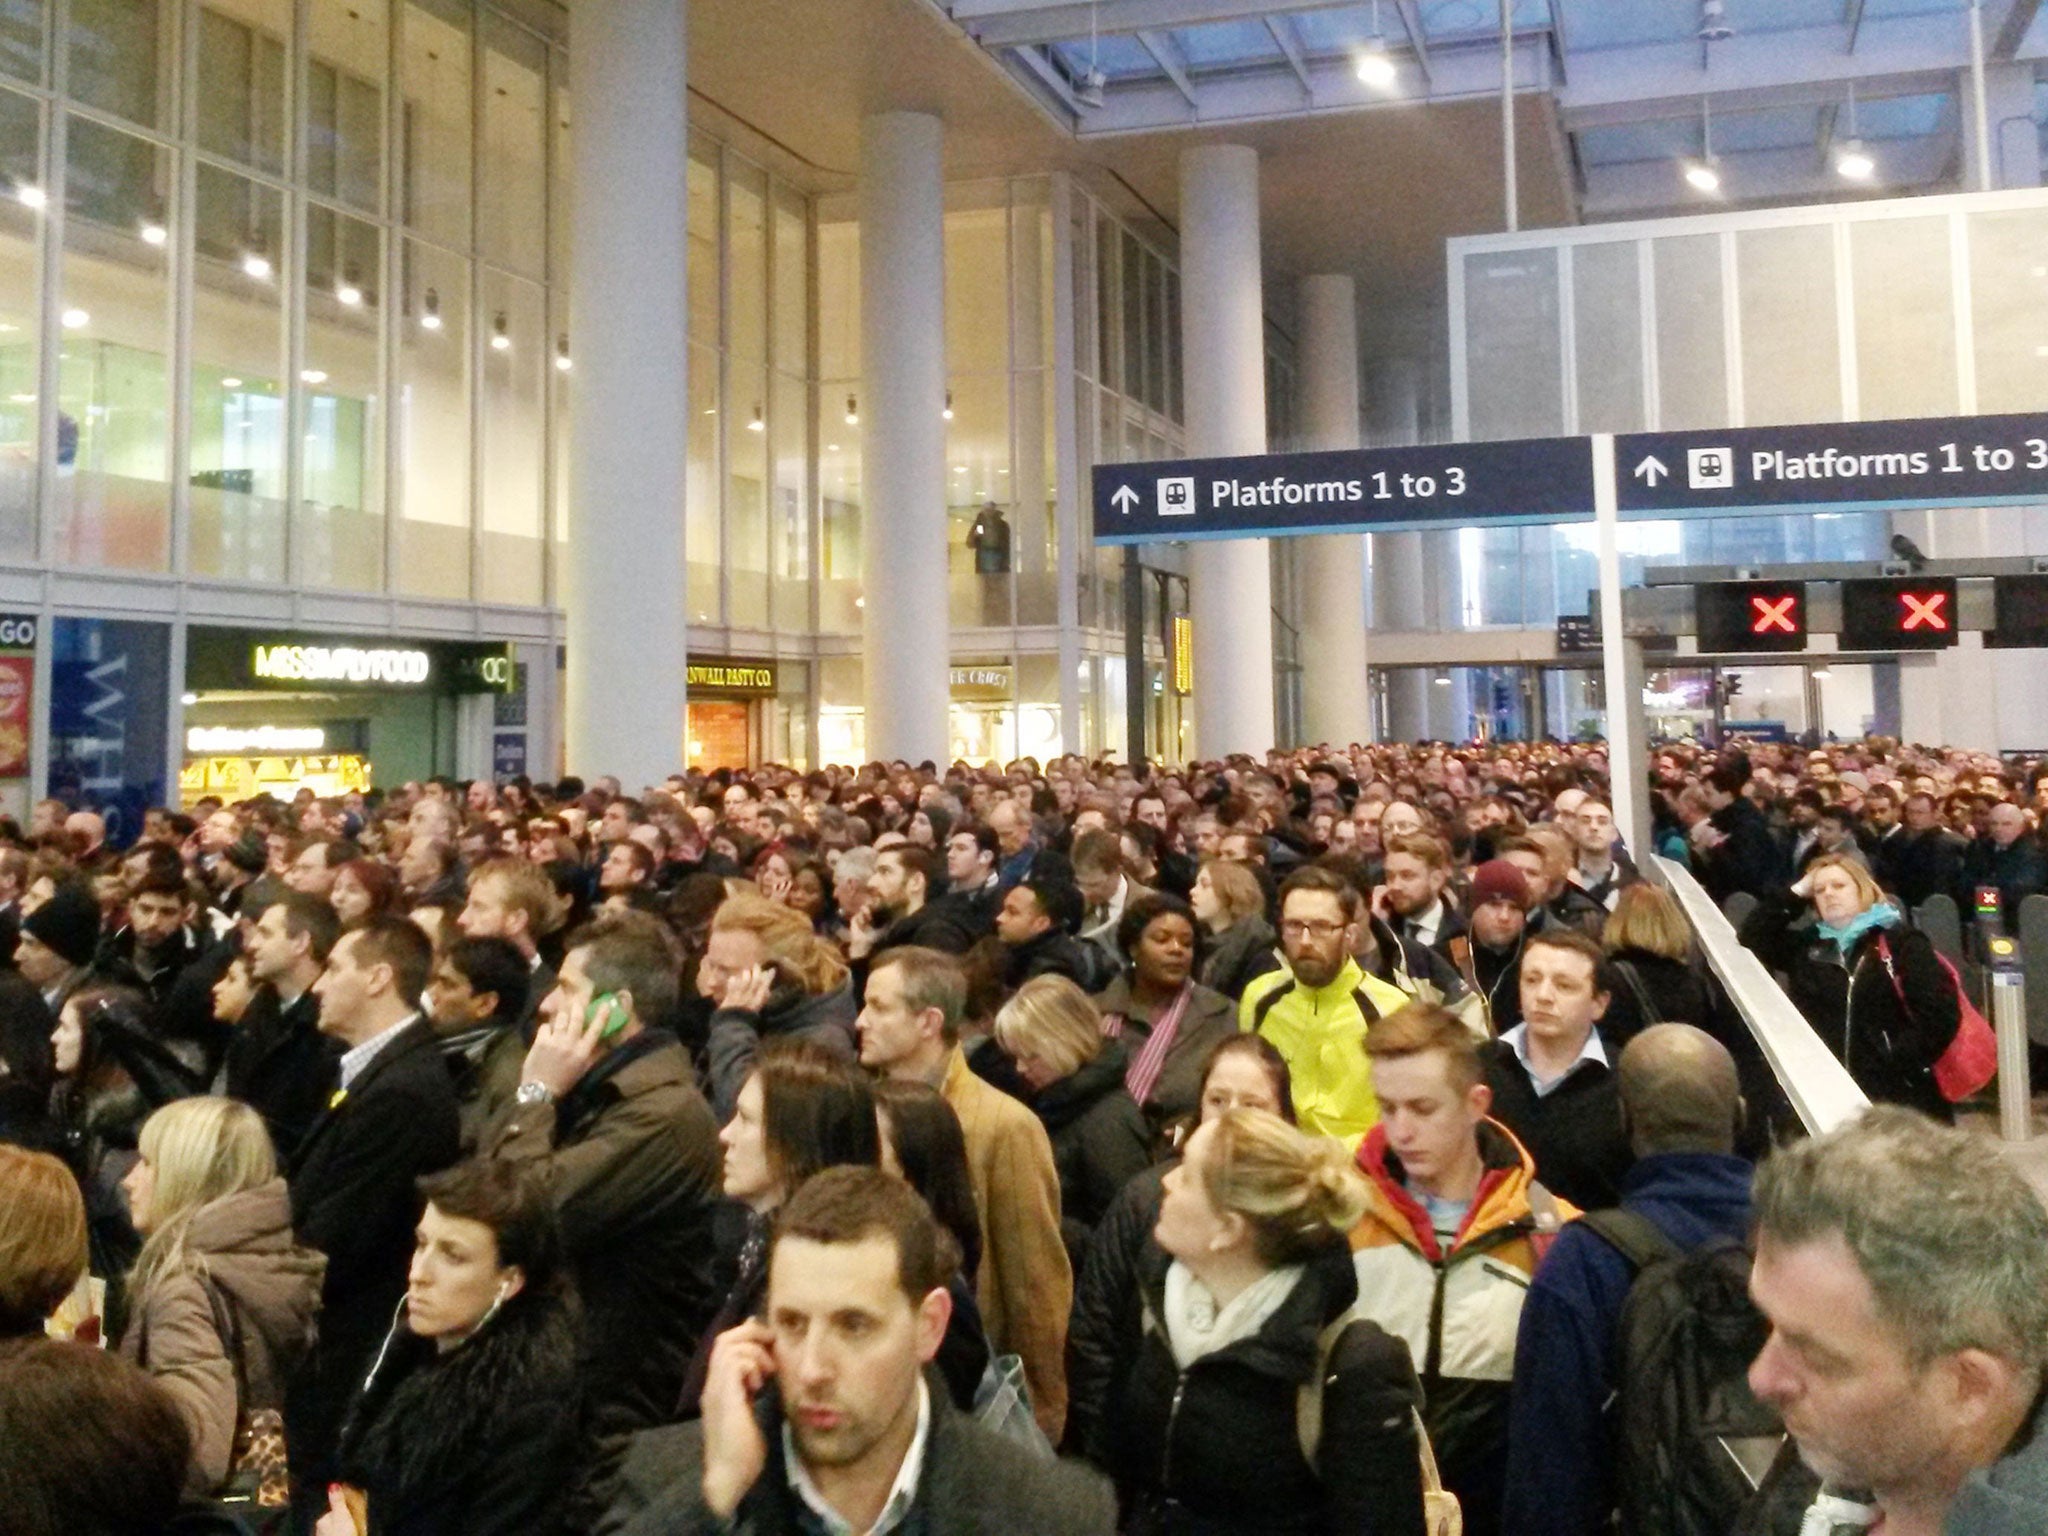 Passengers at London Bridge station, as unions and politicians have called for urgent action to avoid a repeat of the 'life threatening chaos'